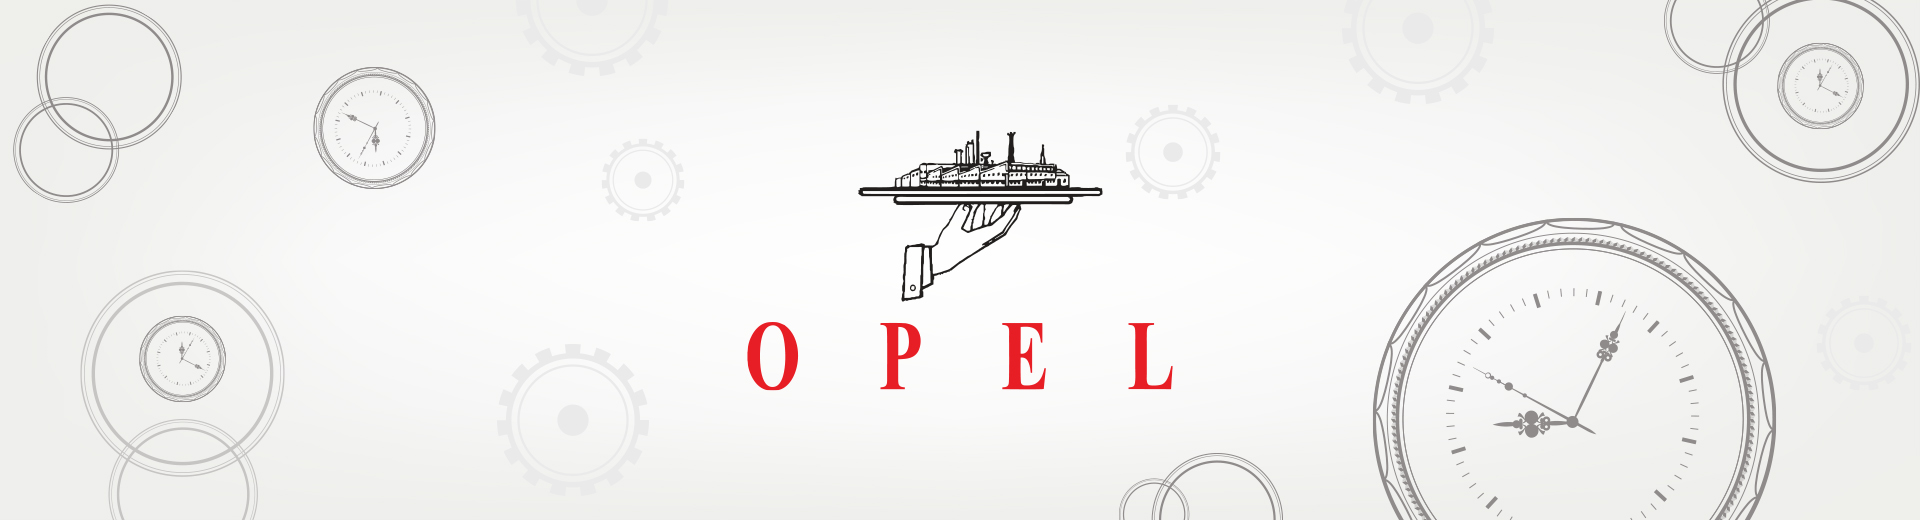 OPEL – The parent company of Propel Industries